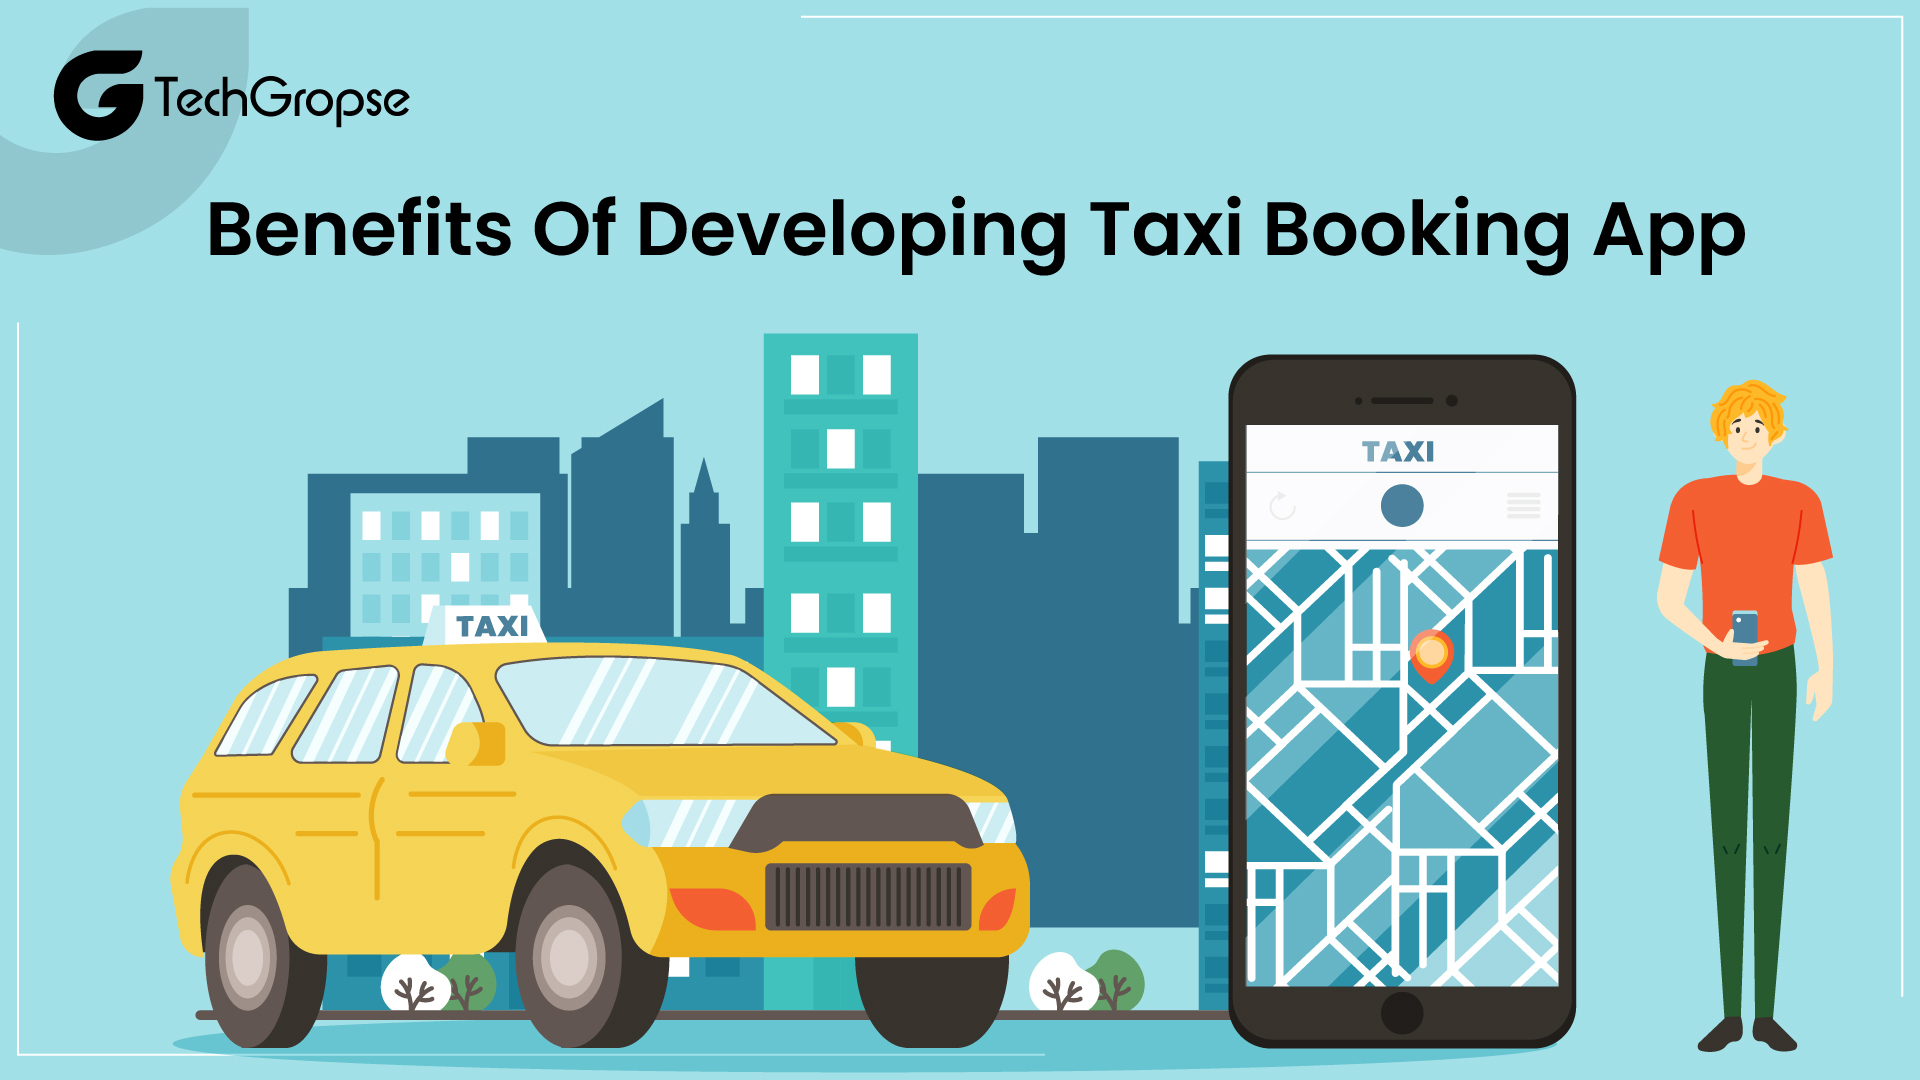 Benefits of Developing a Taxi Booking App